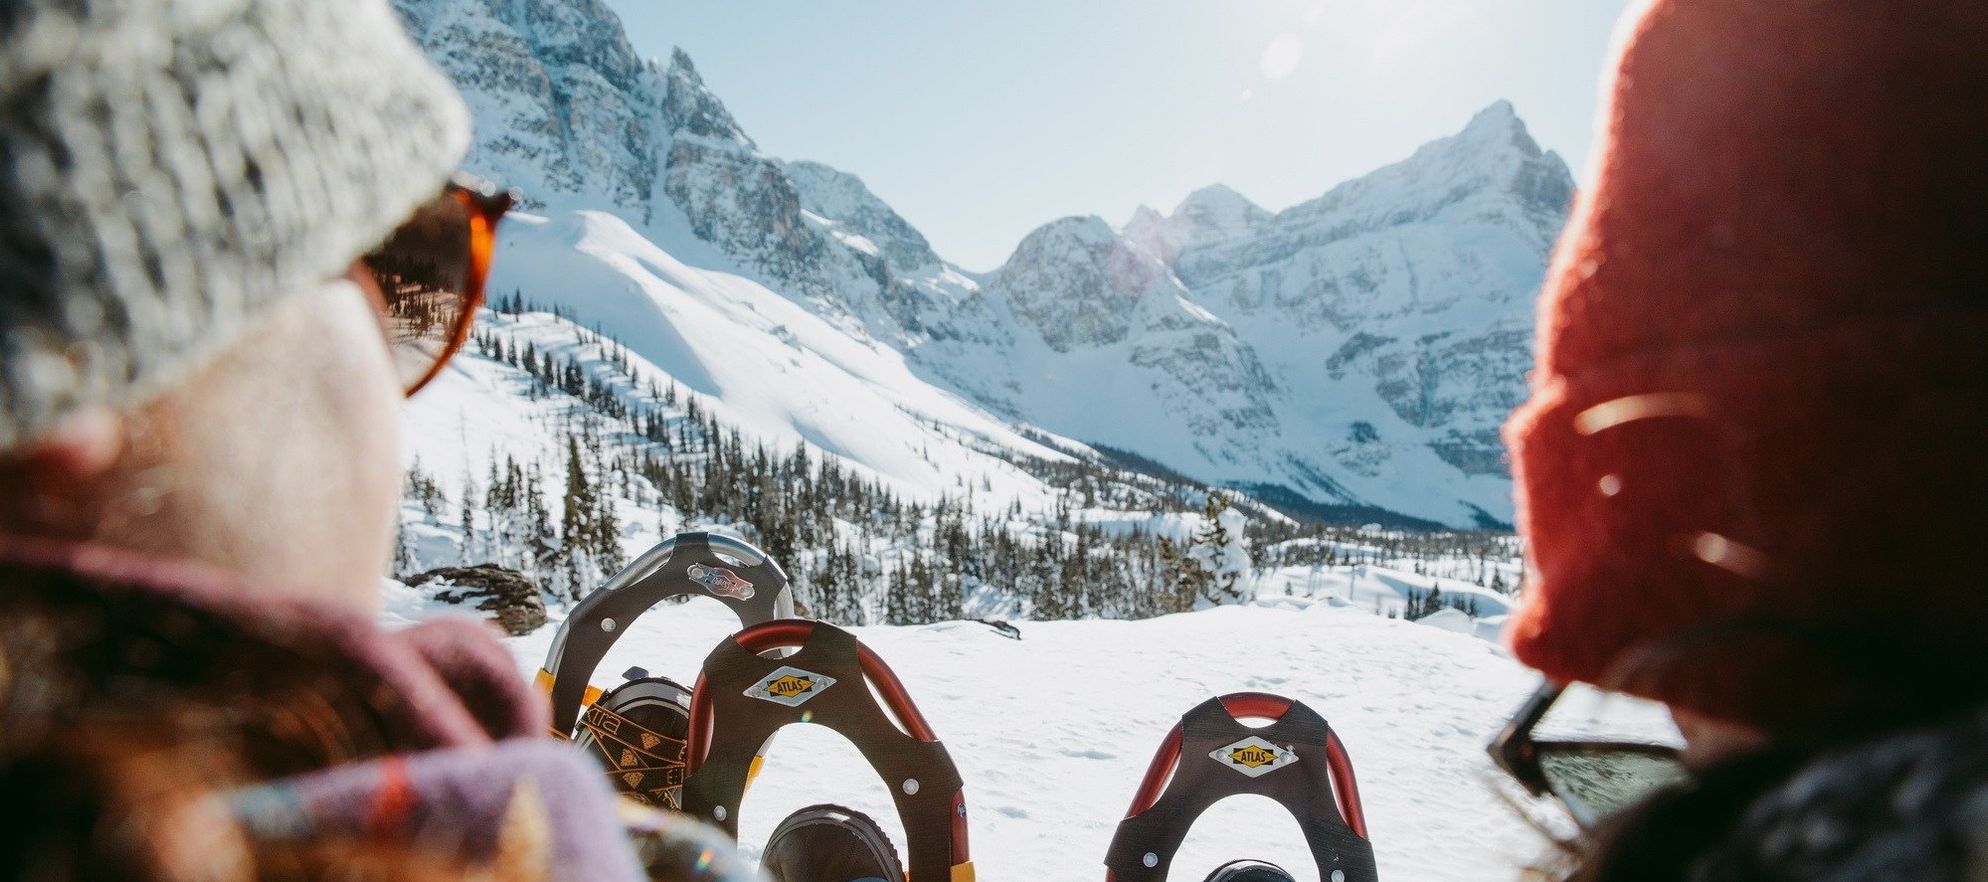 Snowshoeing in Marvel Pass, Banff National Park